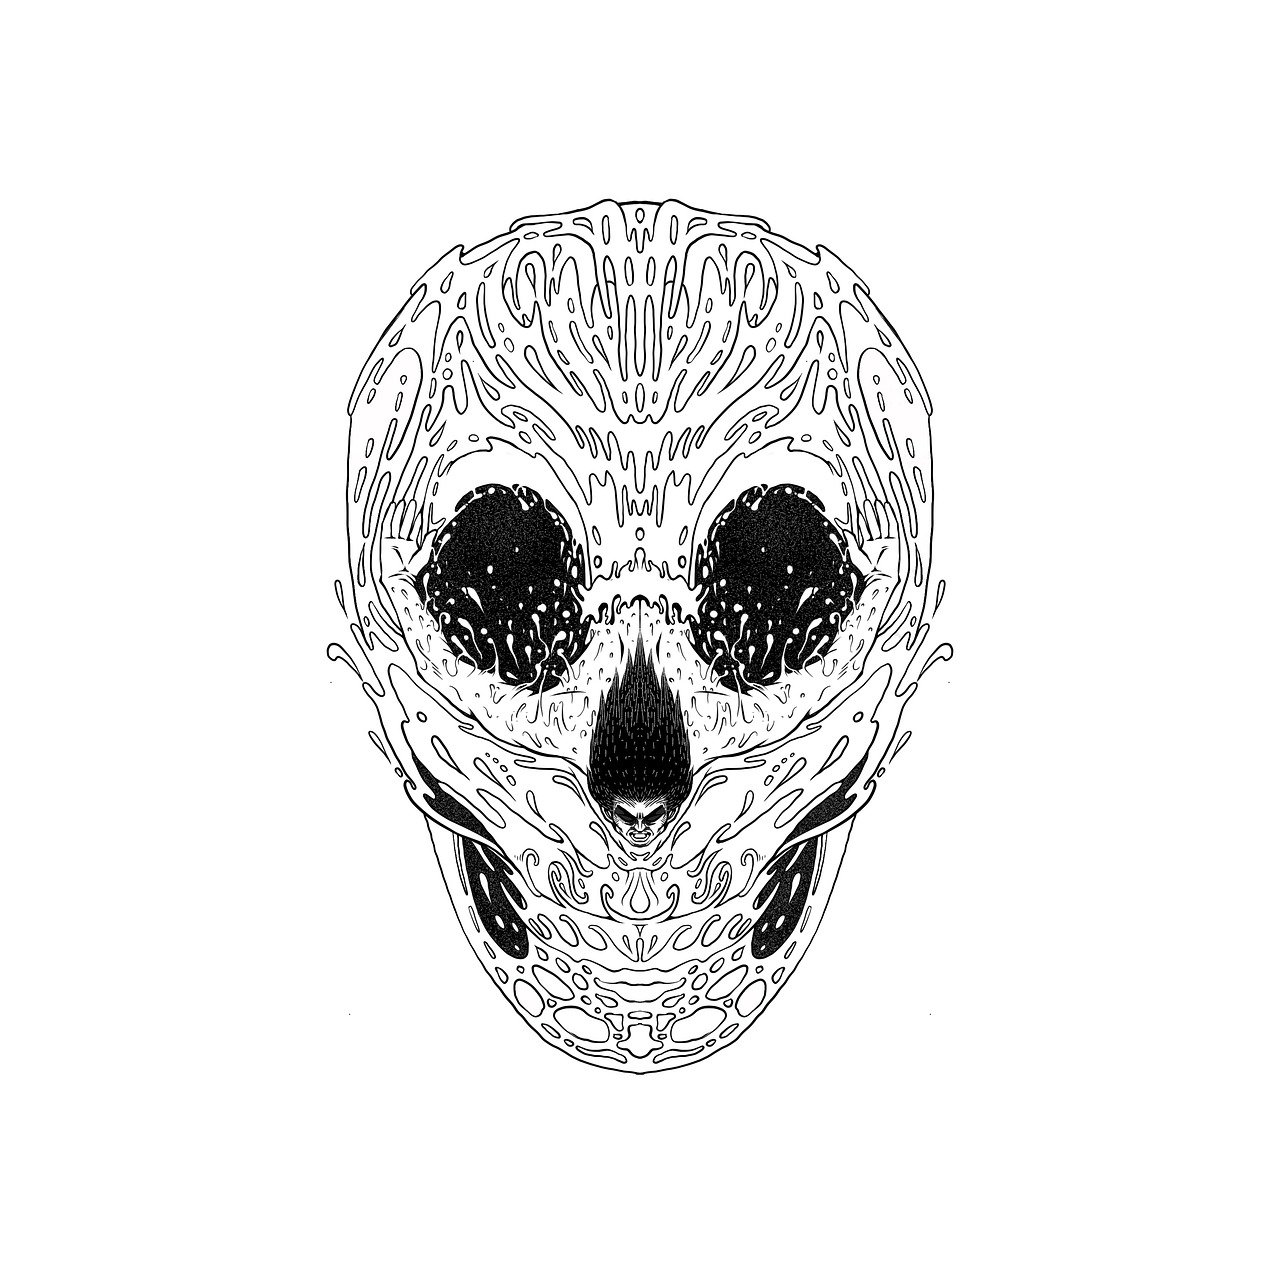 a black and white drawing of a skull, a detailed drawing, minimalism, neural pointillism, rorsach path traced, symmetry illustration, center view